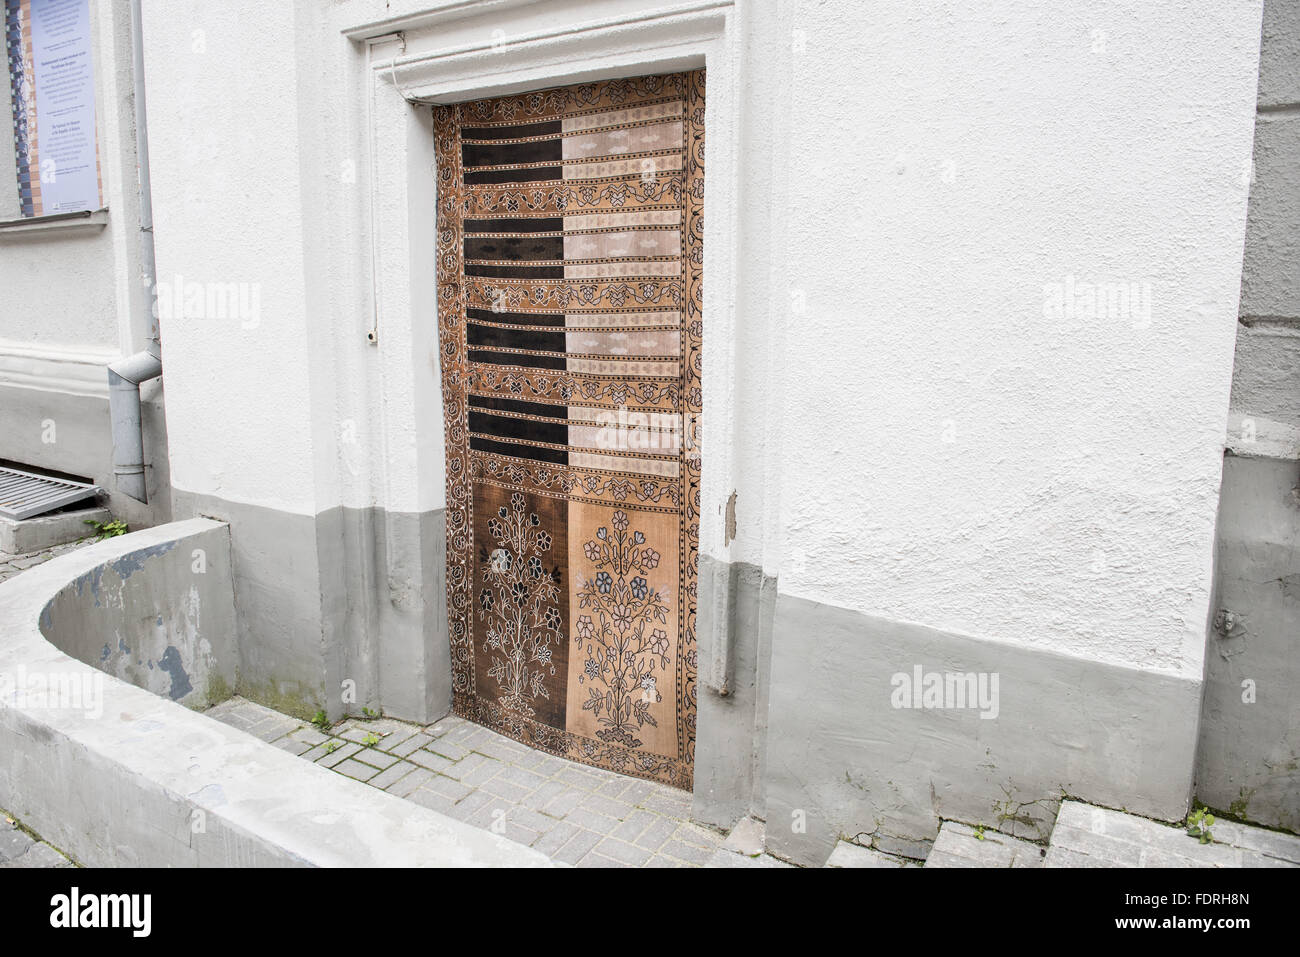 Ancient Door Of A Commercial Building Stock Photo